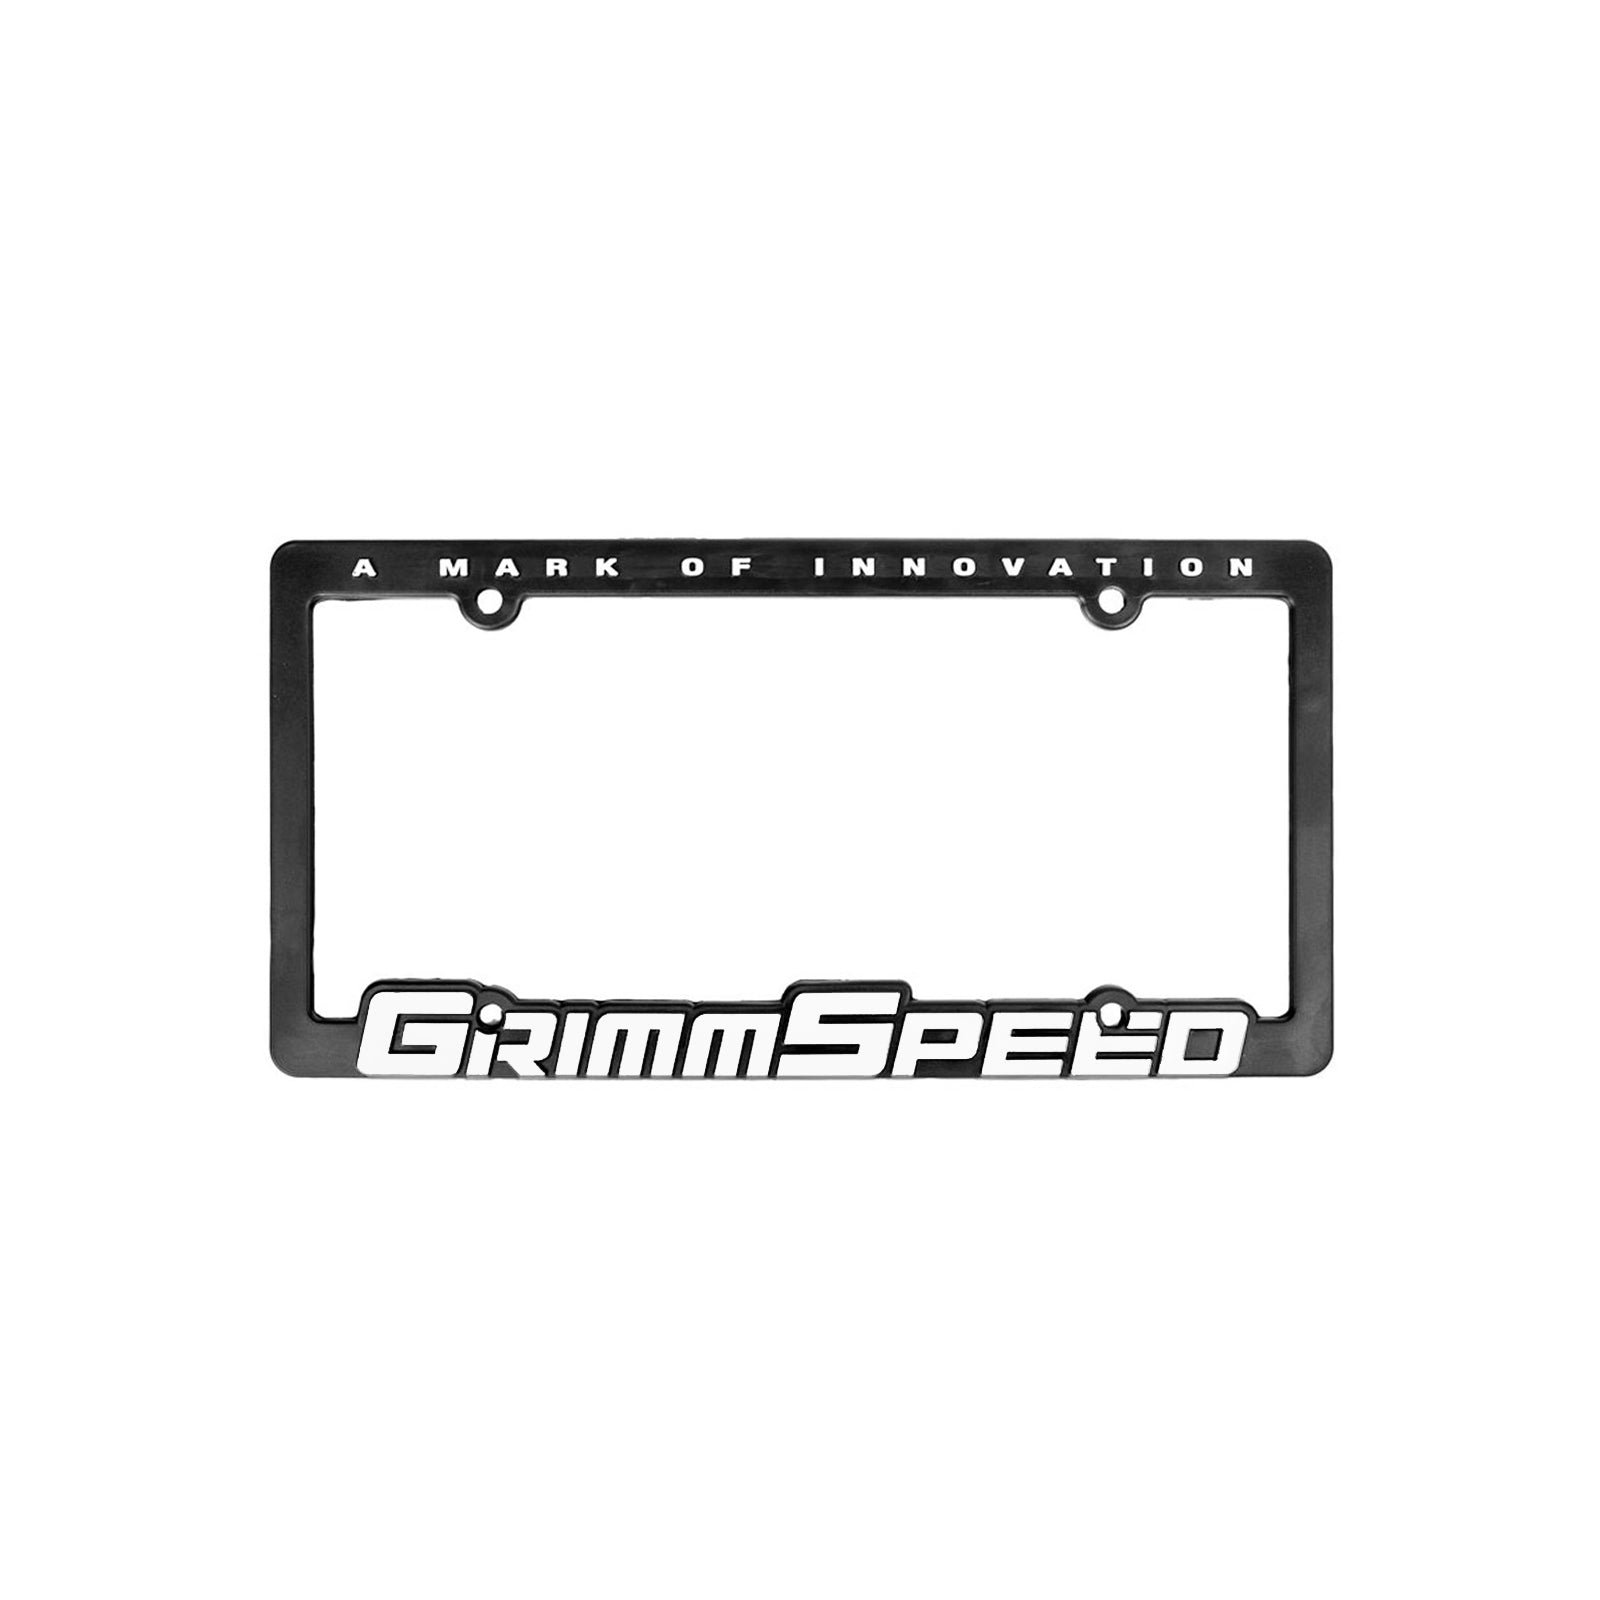 Buy white-single GrimmSpeed License Plate Frames